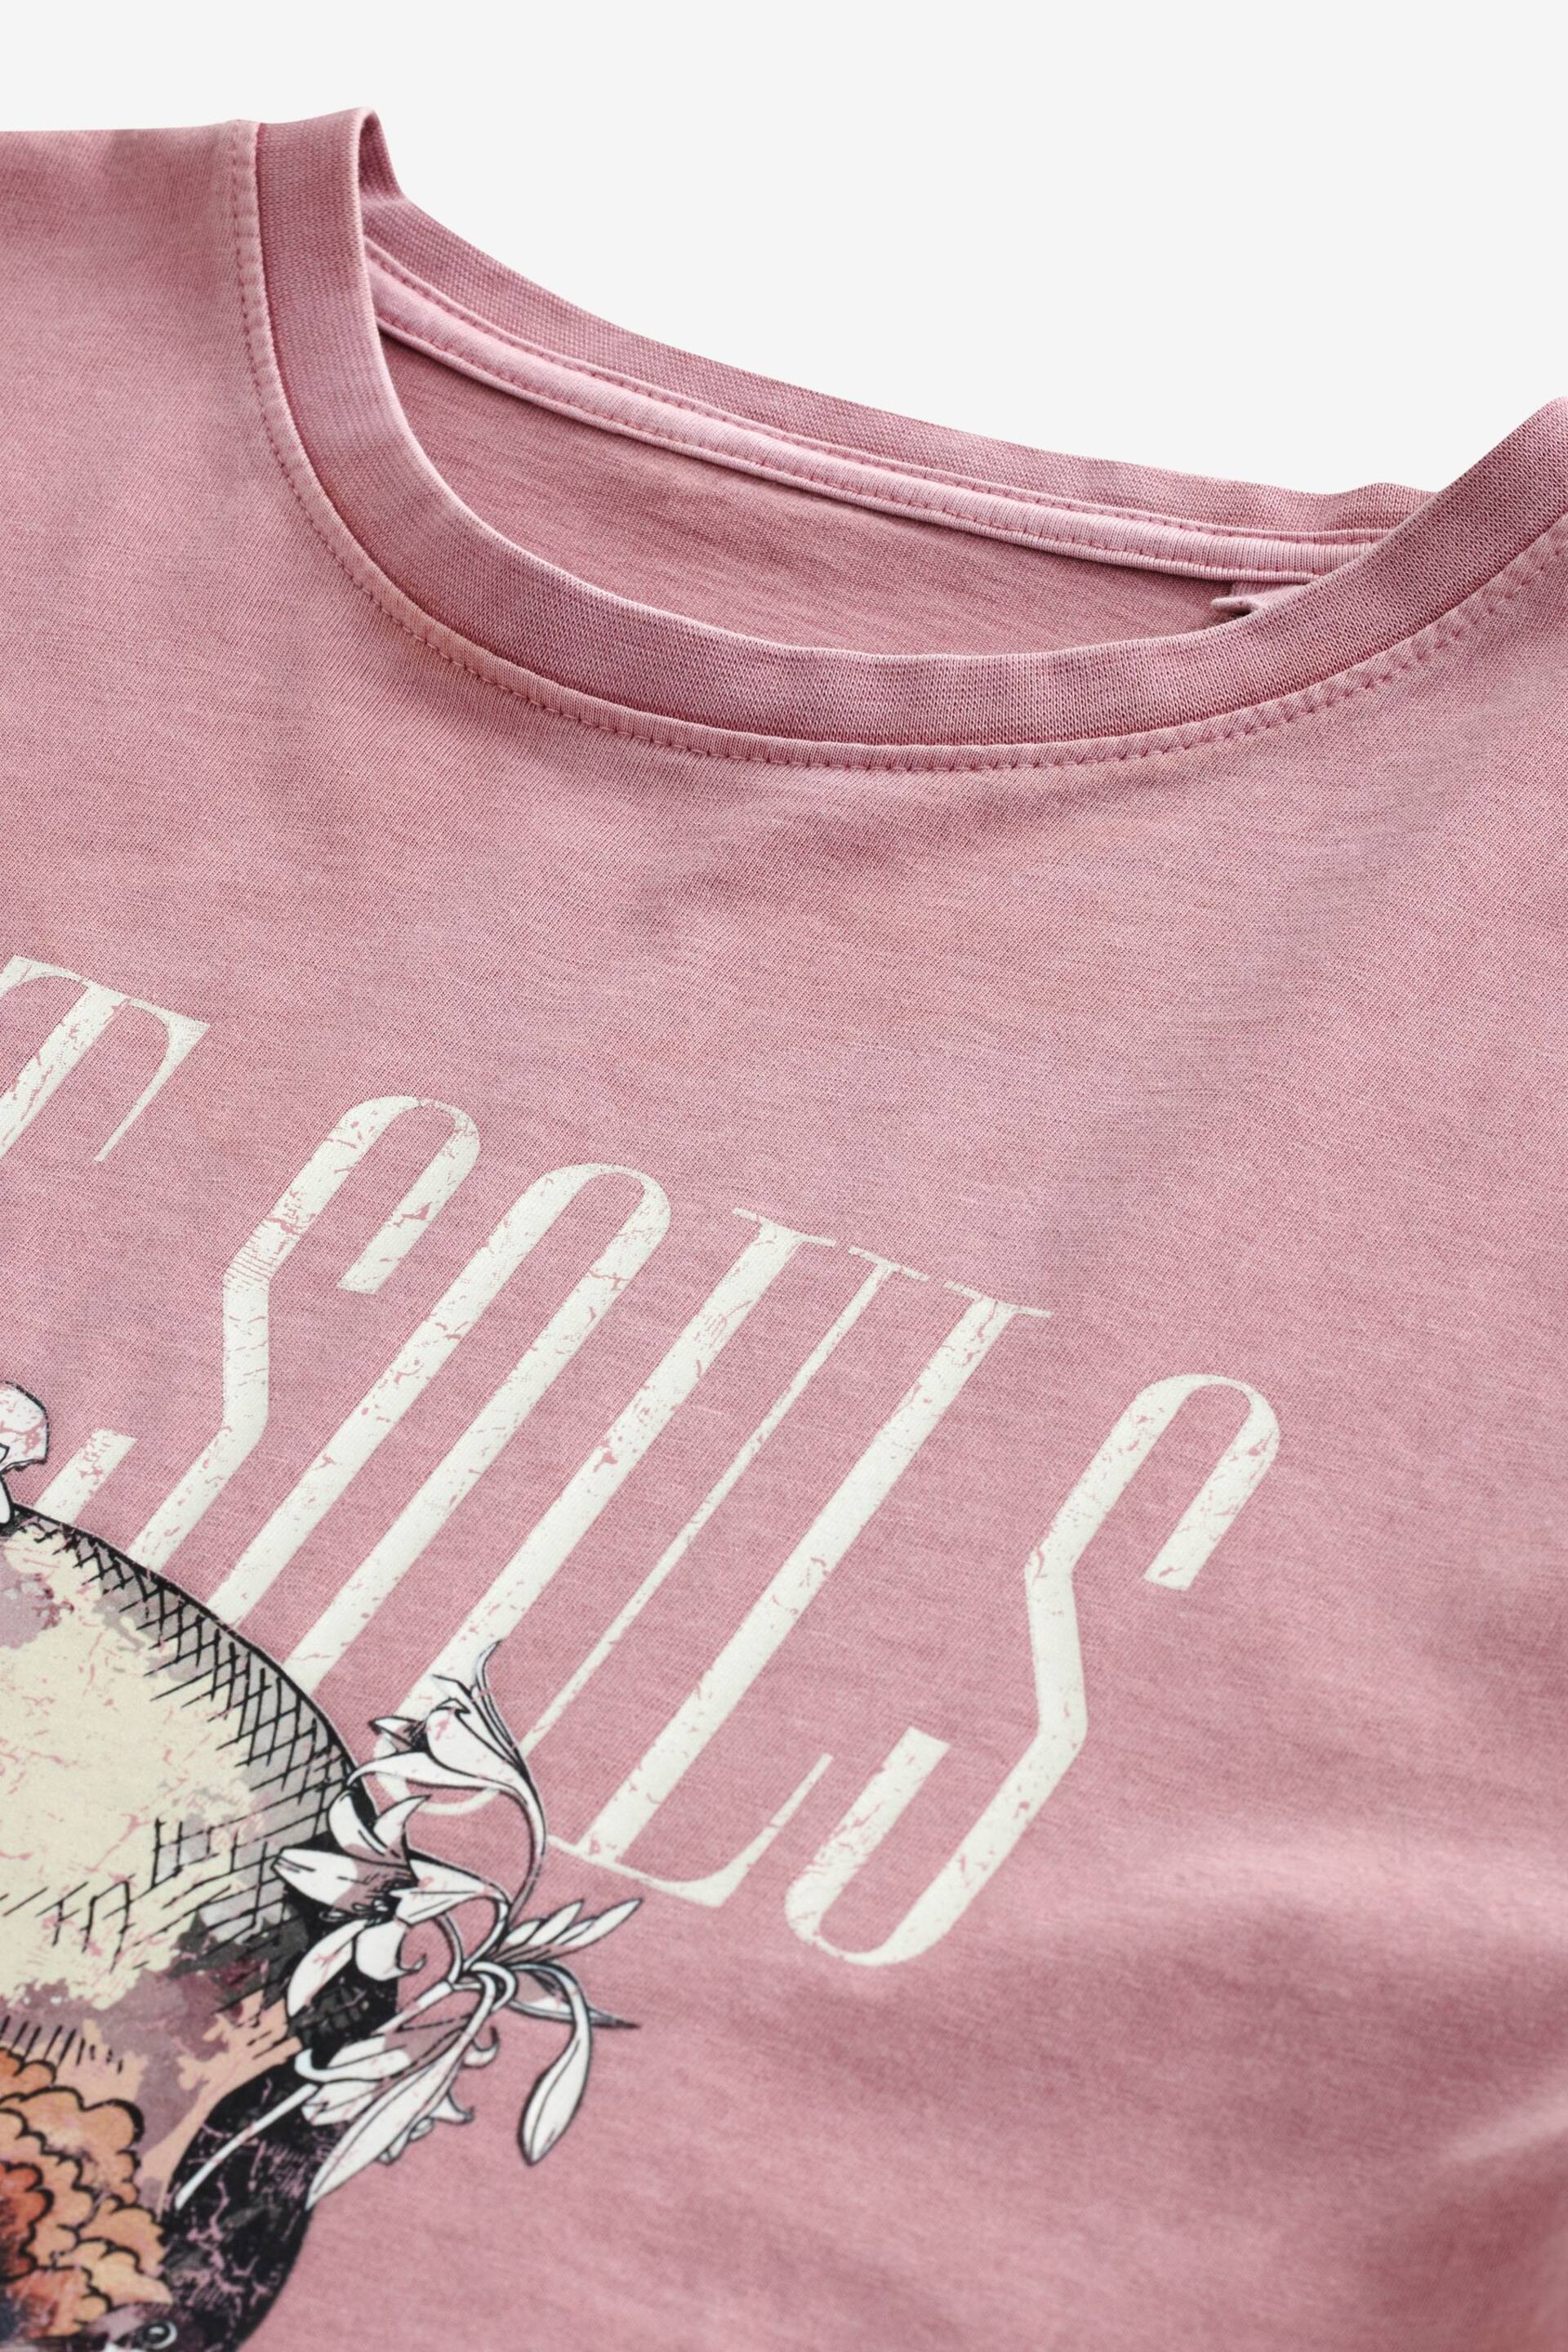 Pink Lost Souls Graphic Skull T-Shirt - Image 6 of 8